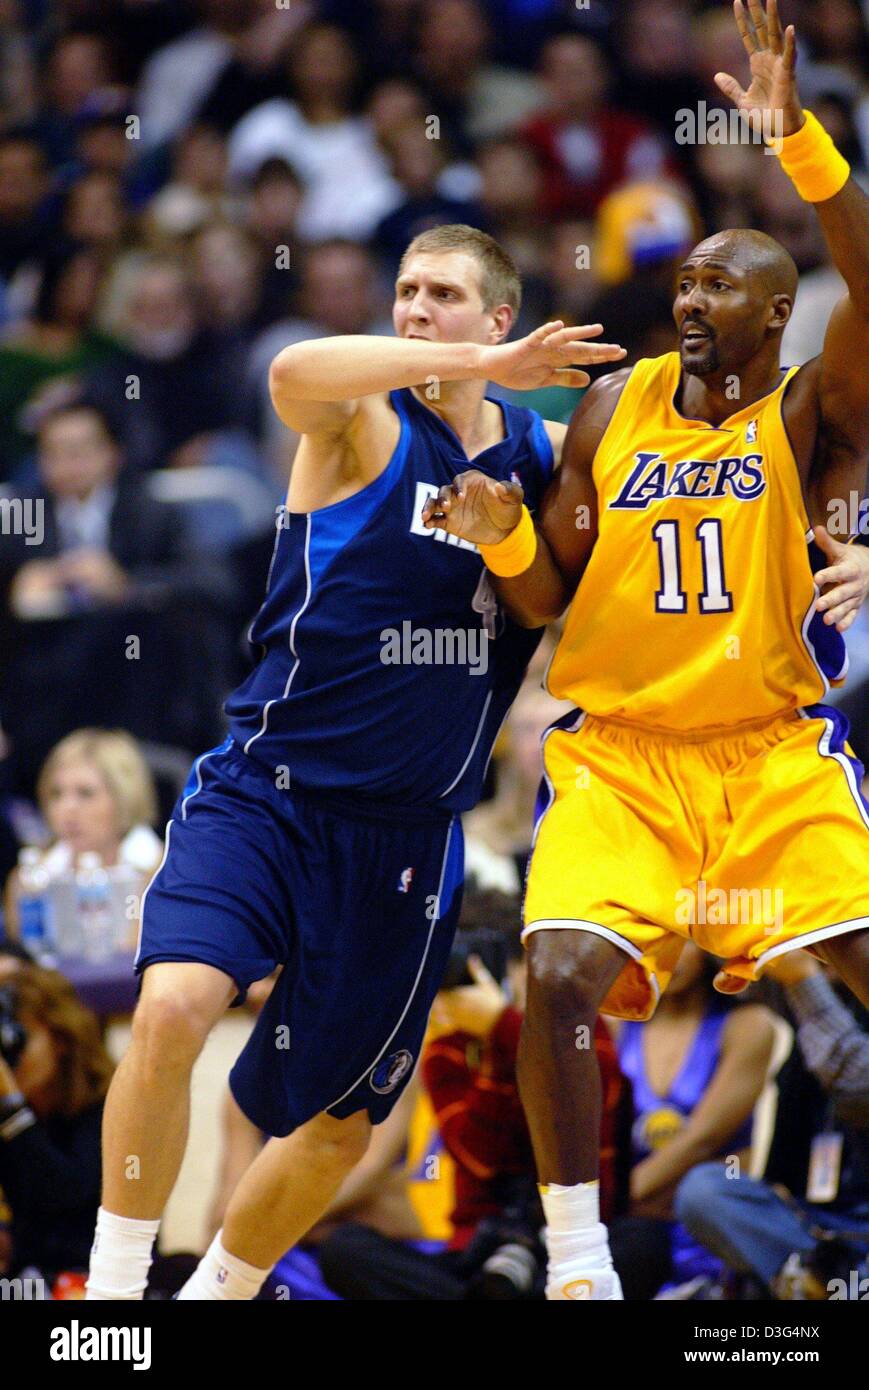 (dpa) -  German basketball pro Dirk Nowitzki (R), who plays for the Dallas Mavericks, struggles for the ball with Karl Malone, who plays for the Los Angeles Lakers,  during the NBA championship match between Dallas Mavericks and Los Angeles Lakers in Los Angeles, California, USA, 13 December 2003. Dallas won the game by a score of 110-93. It was the first victory in 13 years agains Stock Photo